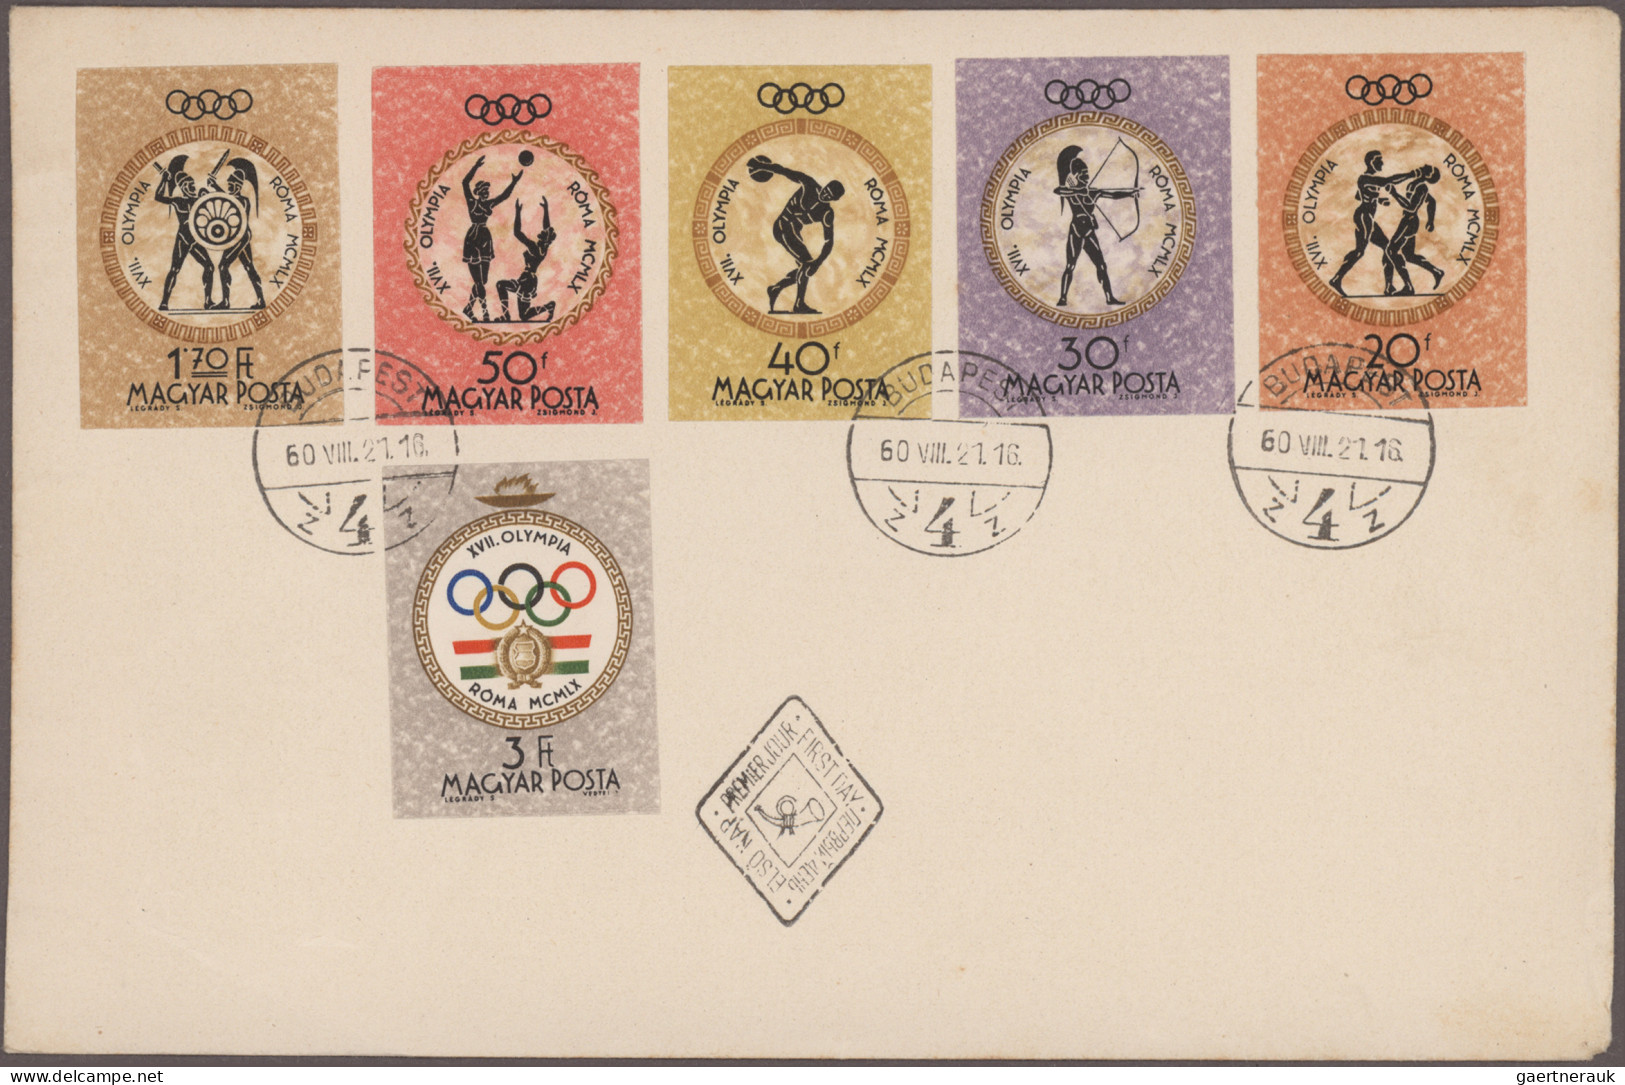 Thematics: Olympic Games: 1924/1976, "SPORTS" in general and "OLYMPIC GAMES" in